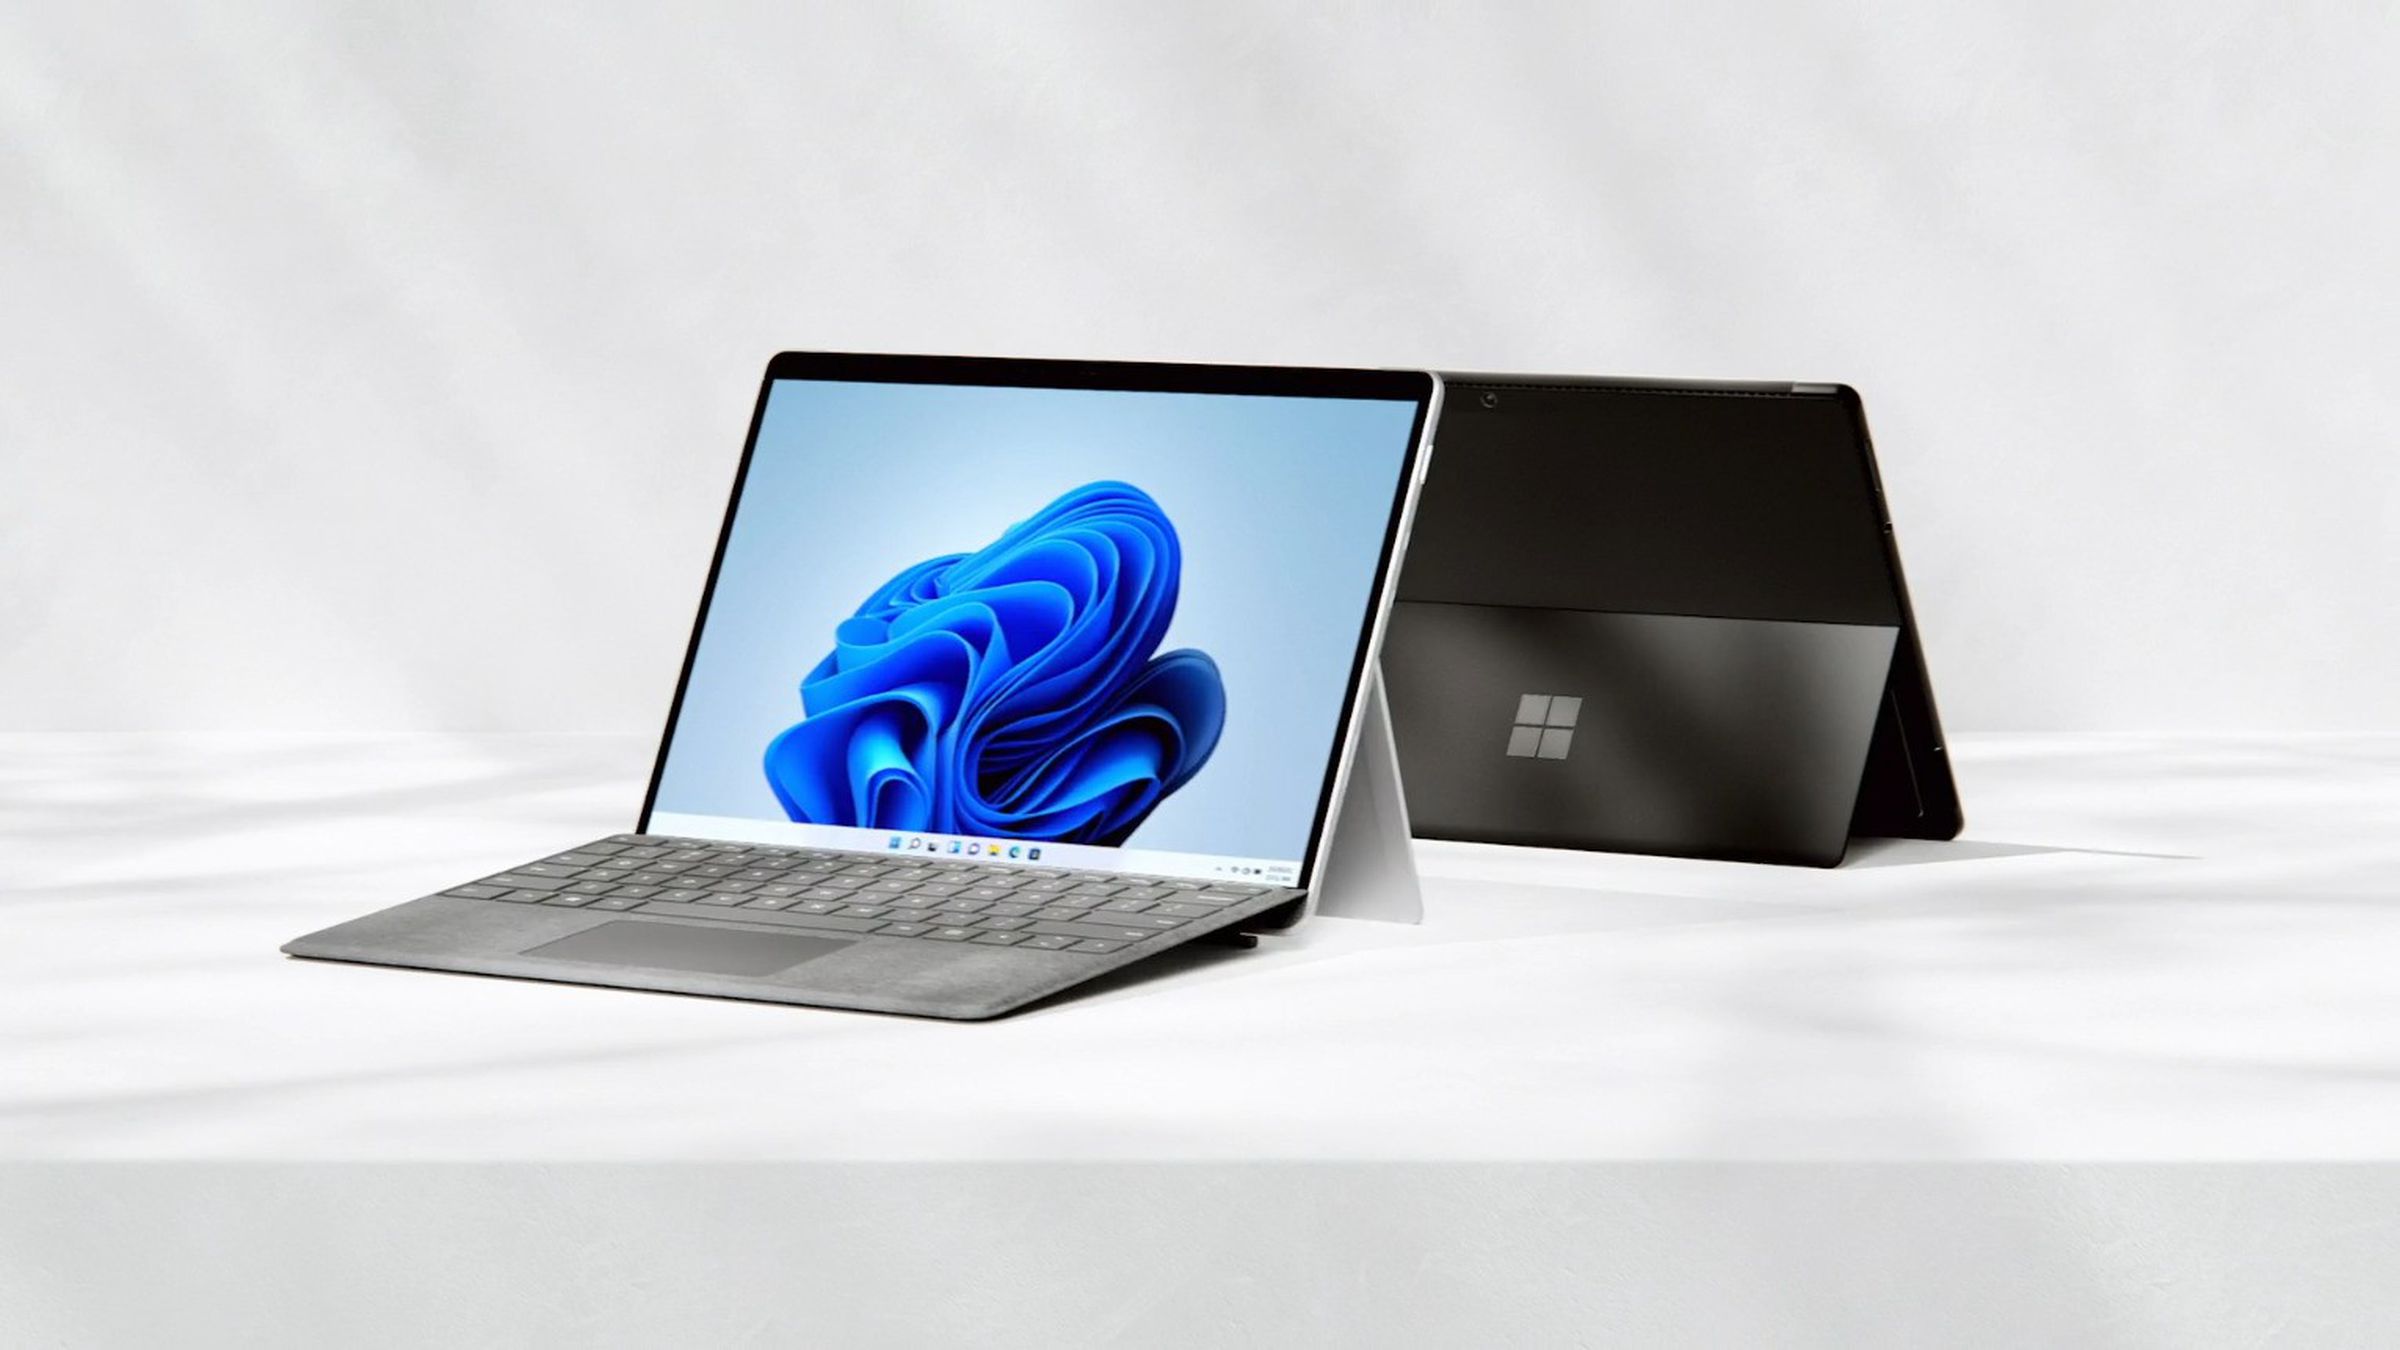 Microsoft’s Surface Pro 8, which has a new design.